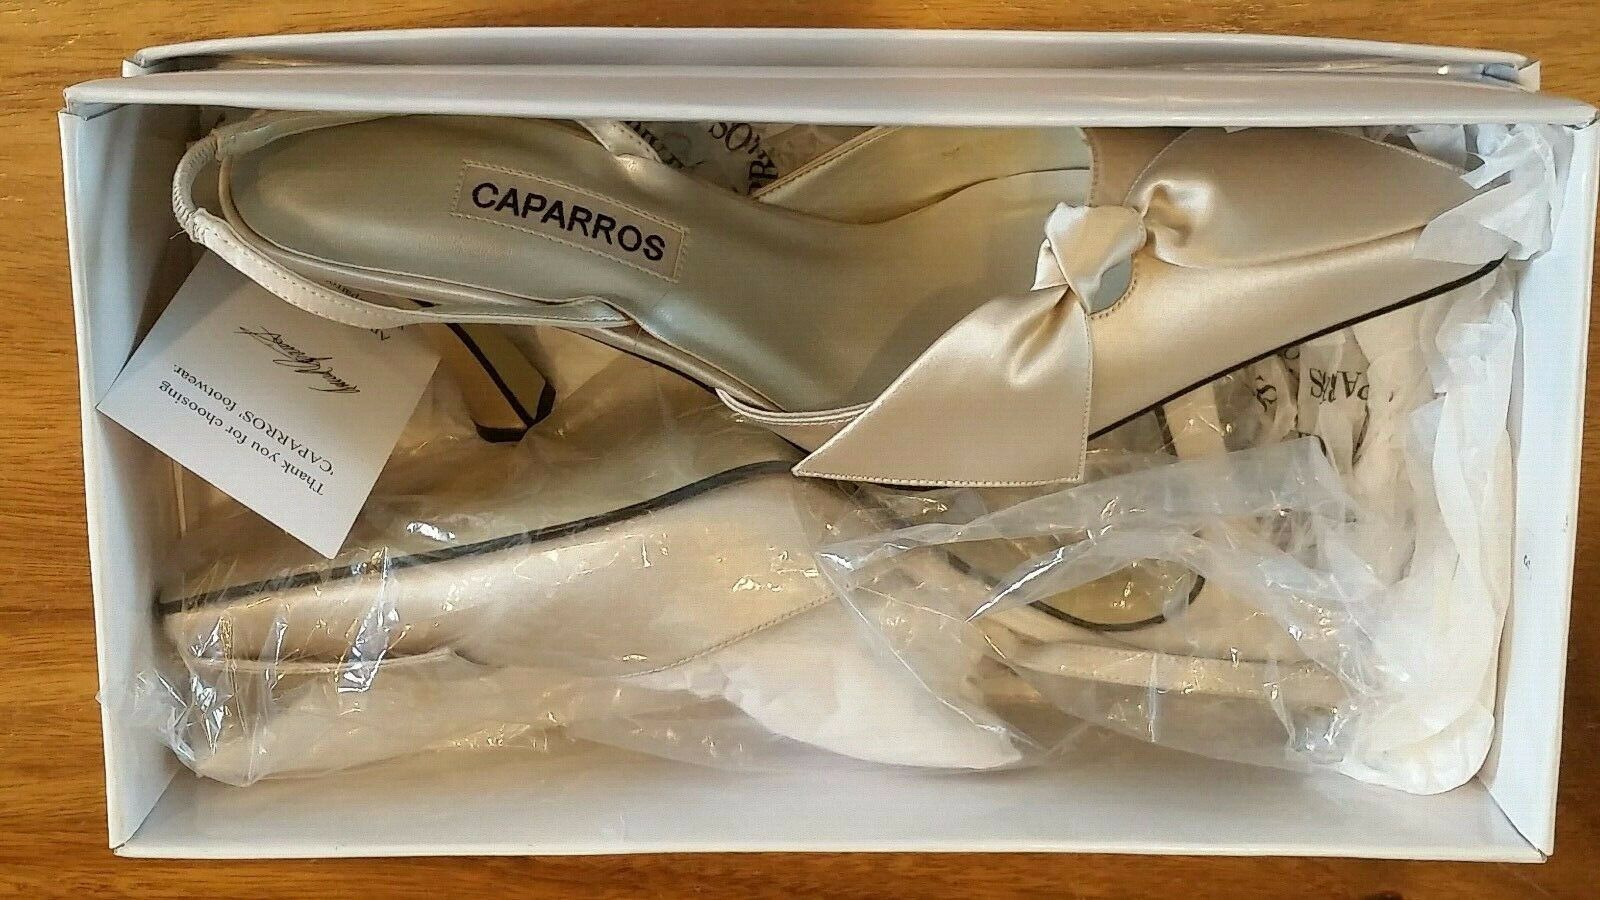 NEW! Caparros CHAMPAGNE SILK VISION F8727 Wedding Dressy High Heel Shoes 7 M